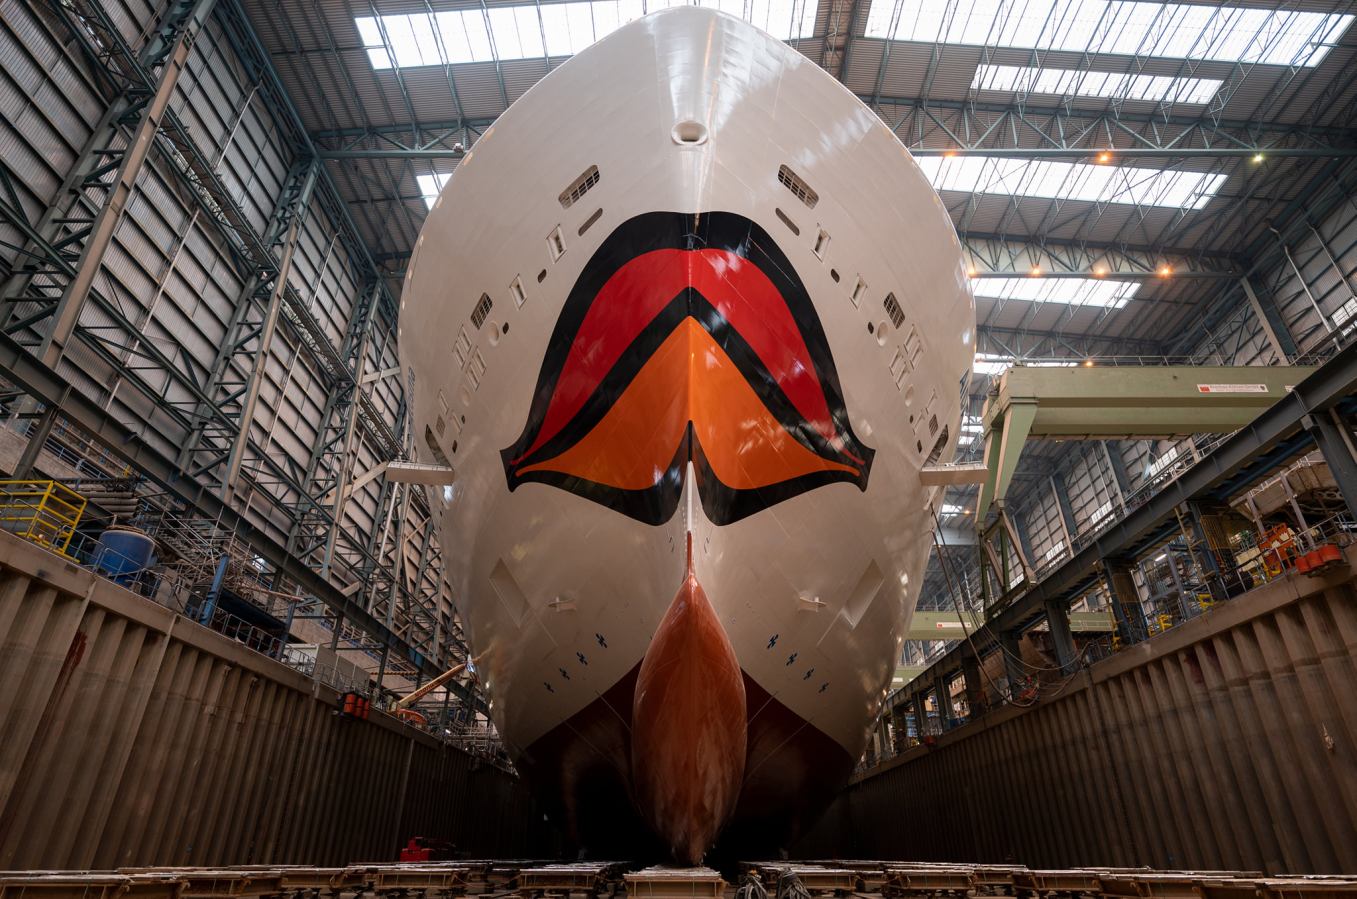 Il cantiere navale tedesco Meyer Werft vara la nuova nave di classe excellence:AidaCosma